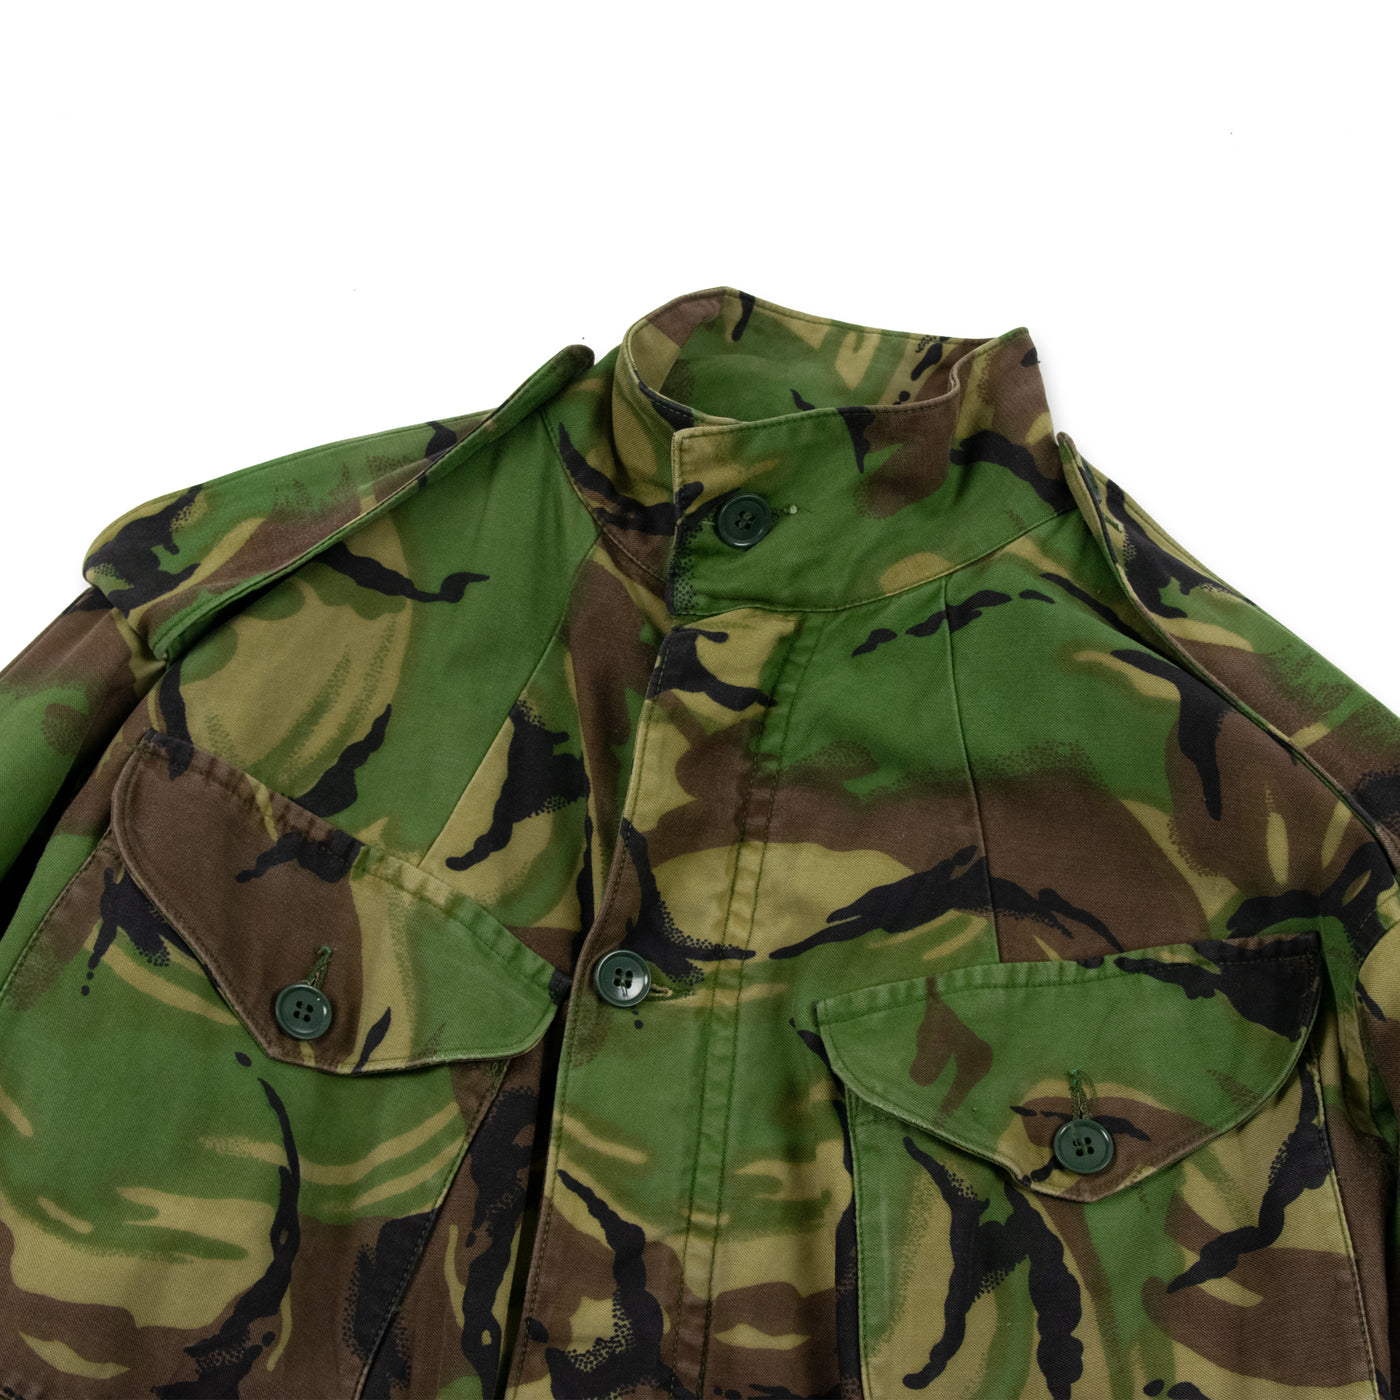 Vintage 90s British Army Combat Smock Temperate Woodland DPM Camo Jacket M CHEST